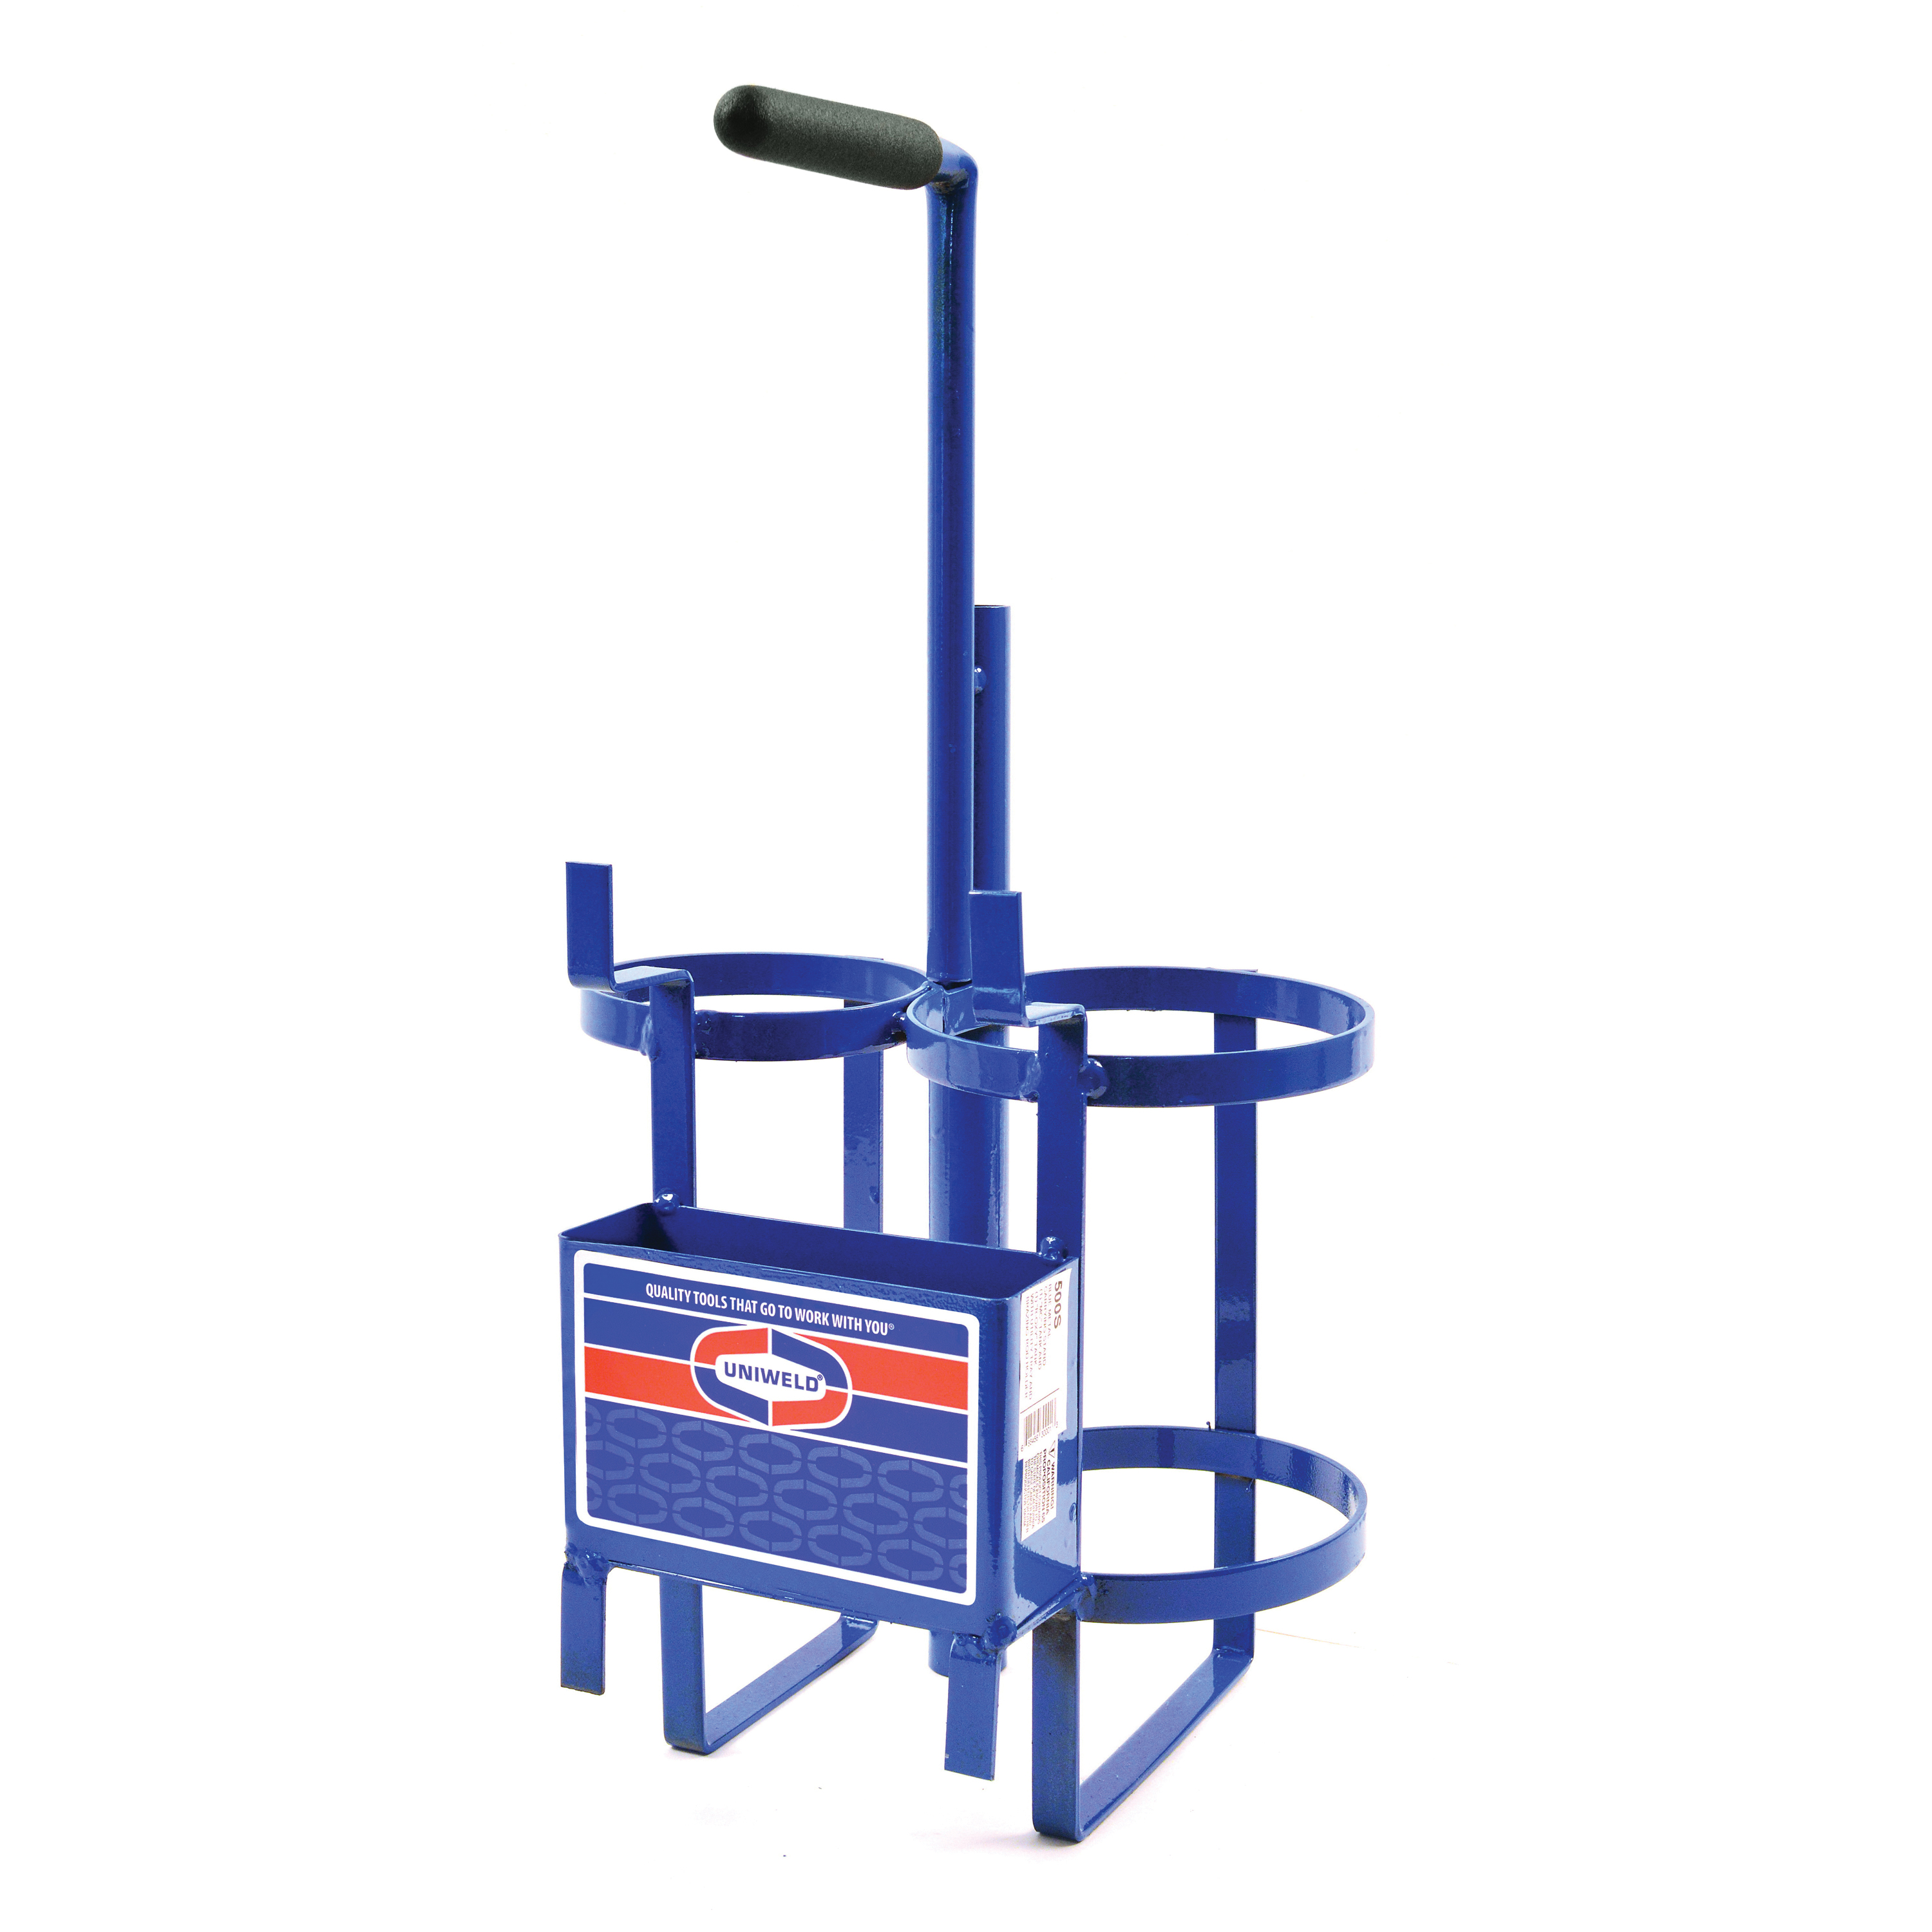 UNIWELD® 500S Carrying Stand, Steel, Blue/Black